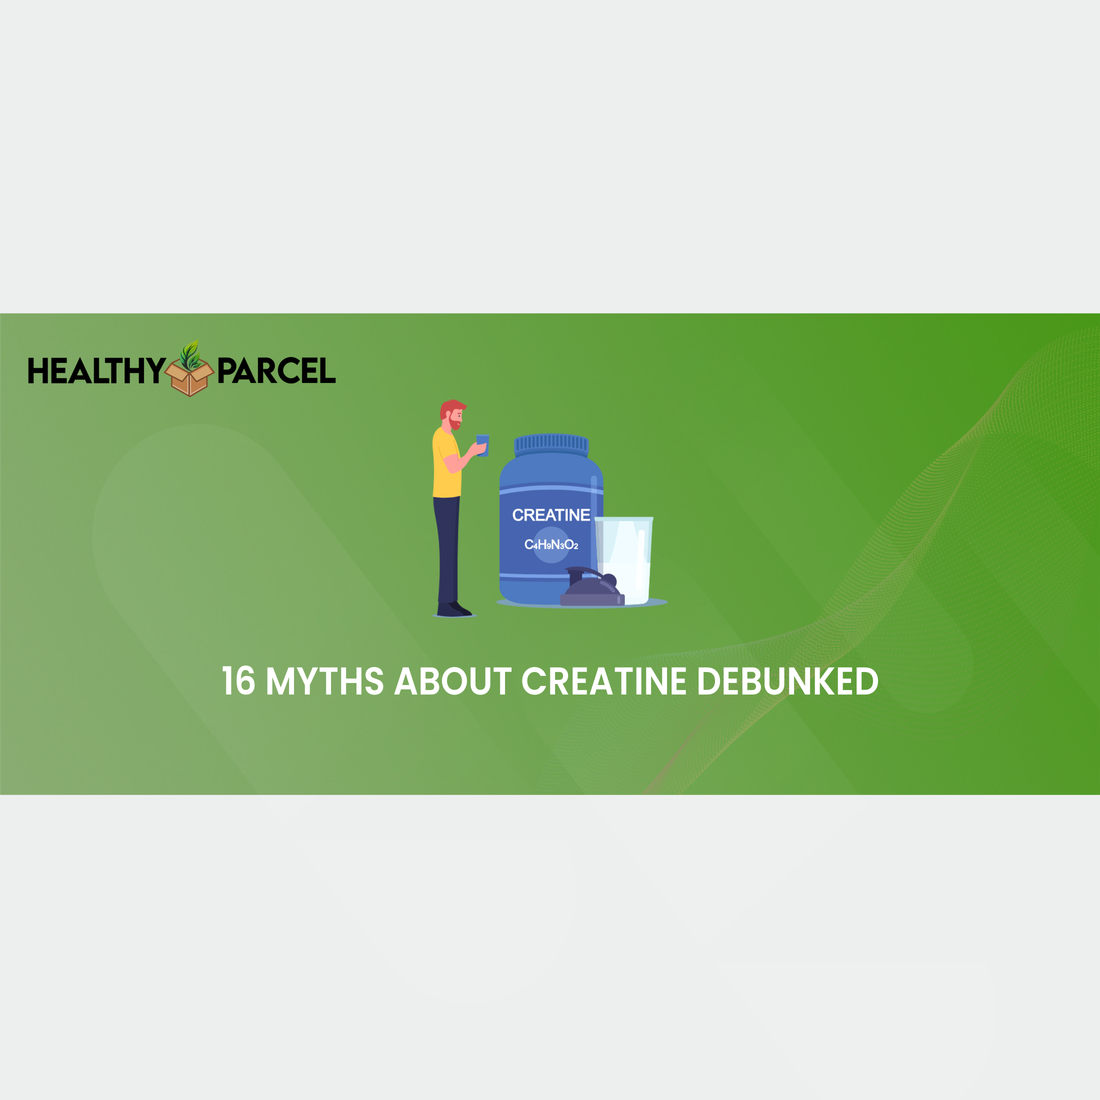 16 Myths About Creatine Debunked